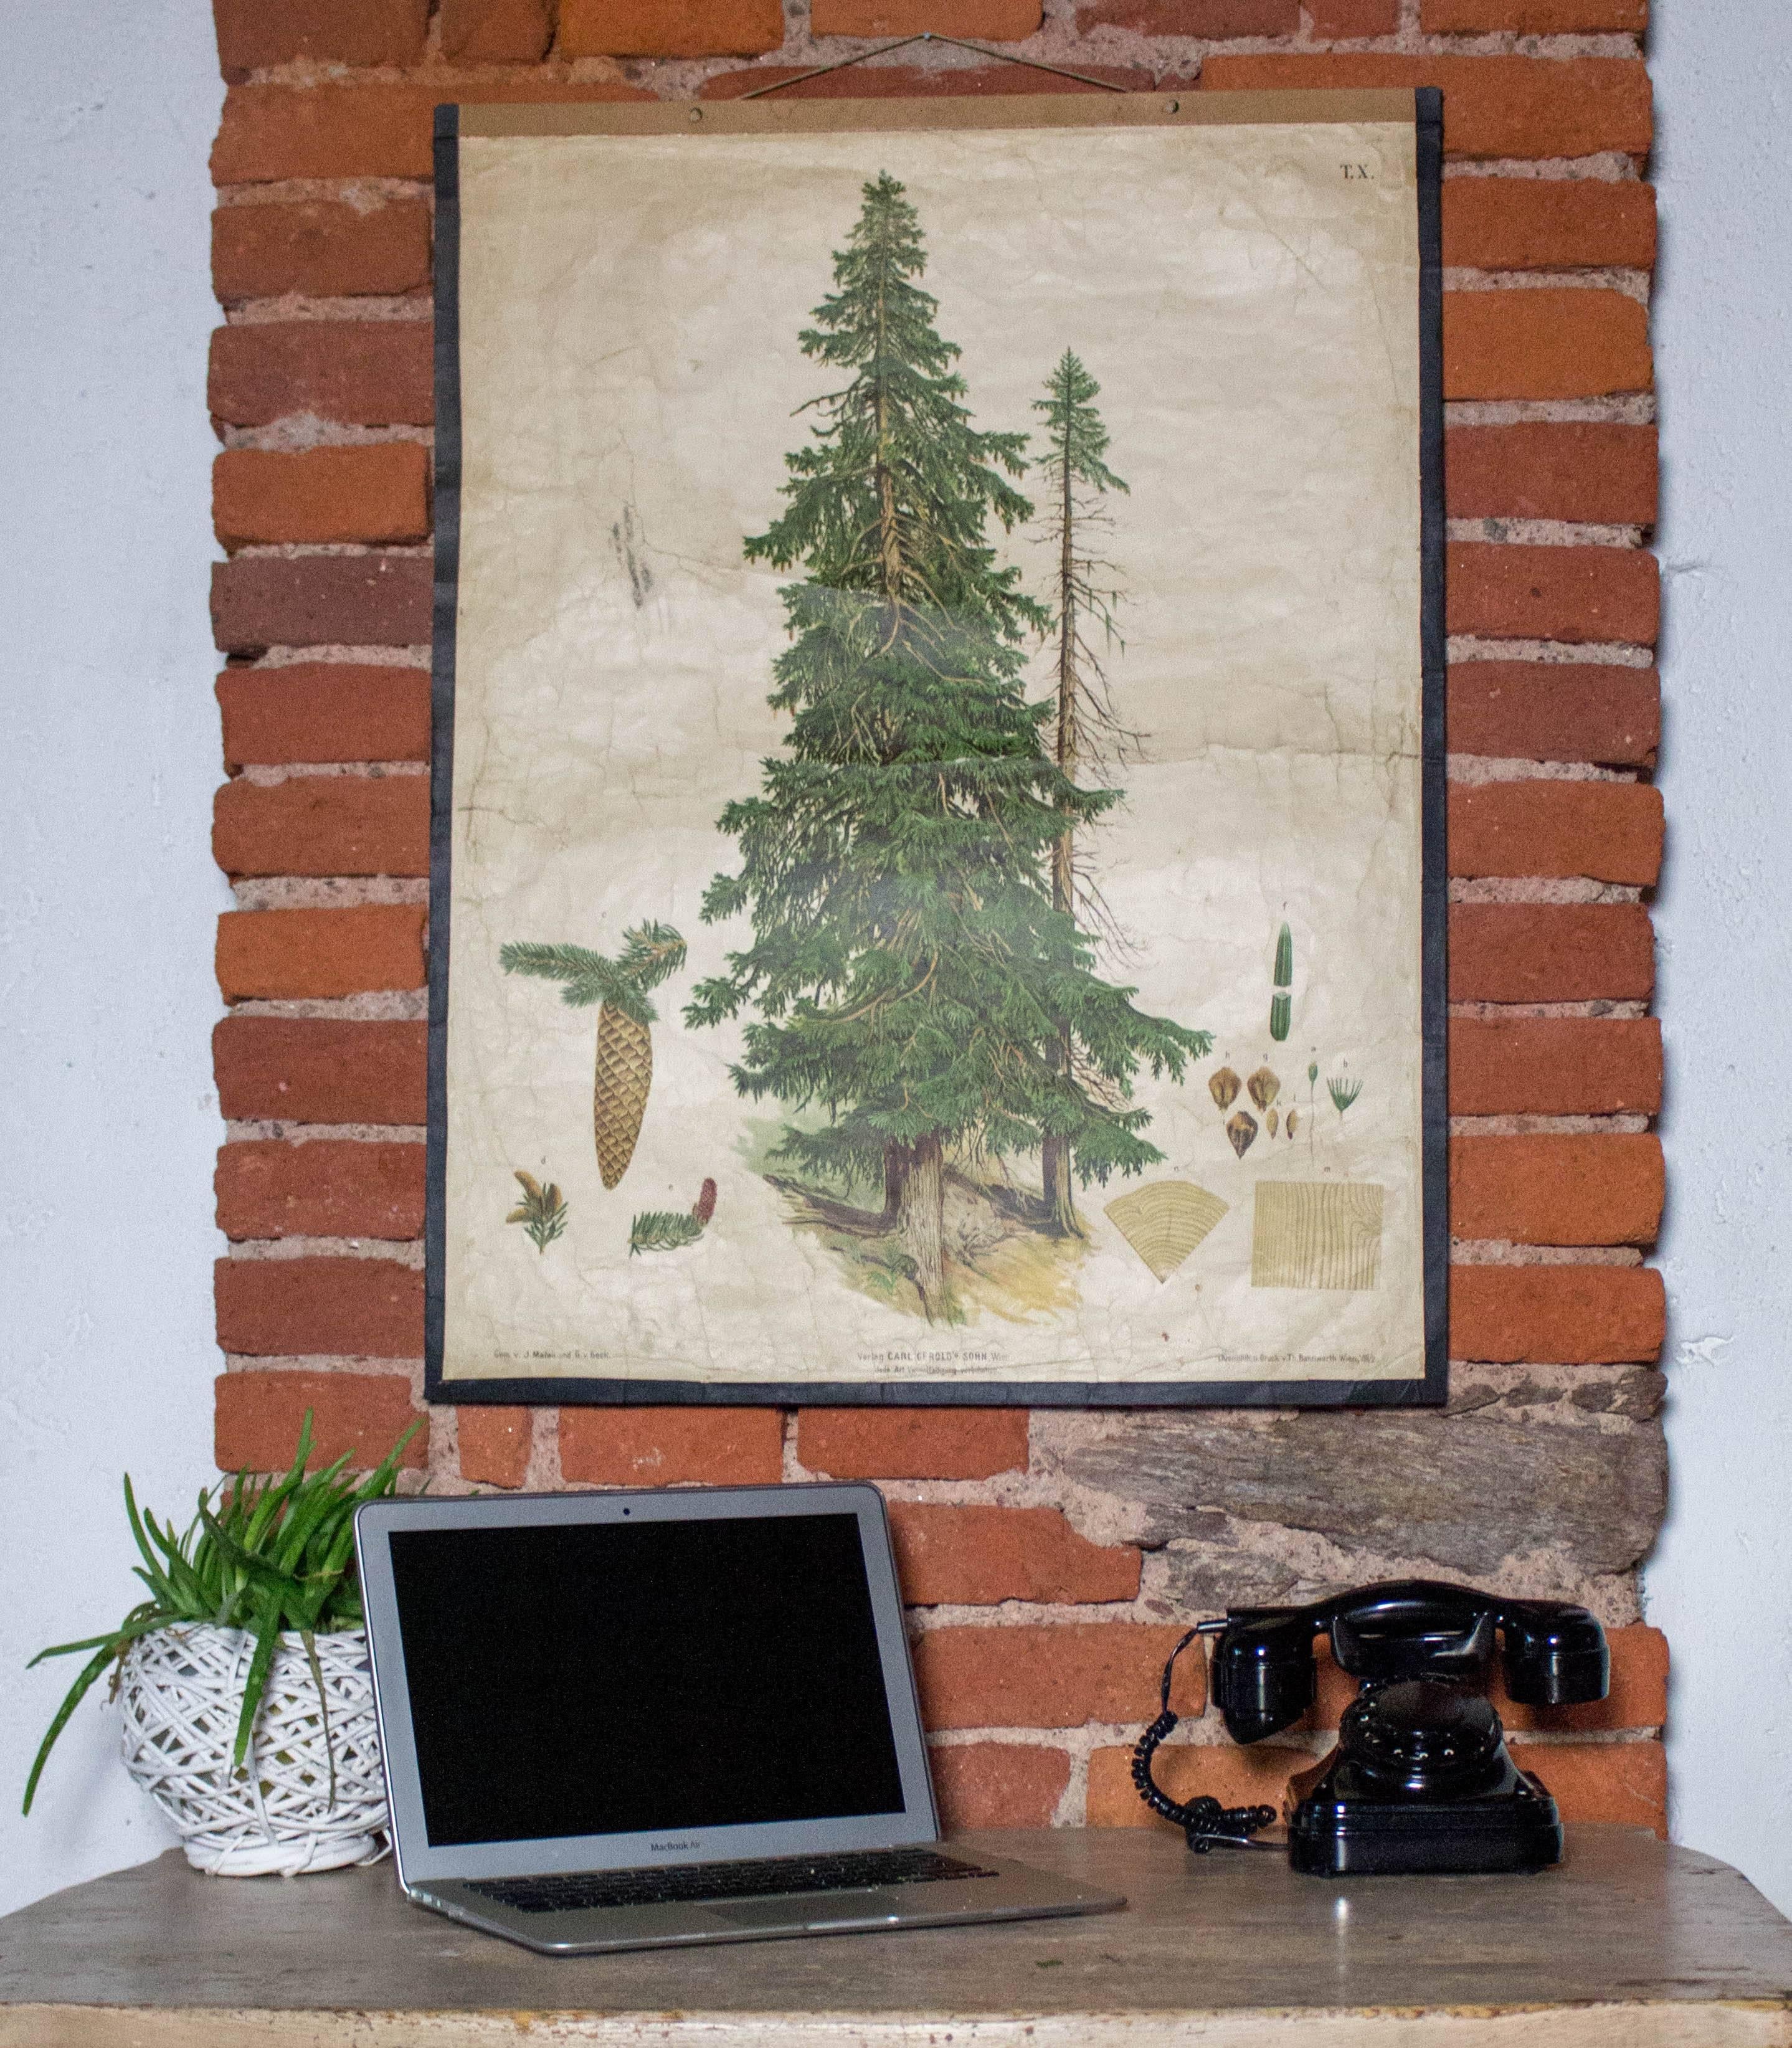 This antique lithograph was designed by J. Marak and G. V. Beck, printed by the lithographer Th. Bannwarth in 1879 in Vienna, Austria and published by Gerold & Sohn. It is made from paper and features a spruce tree with its leaves, blossoms and